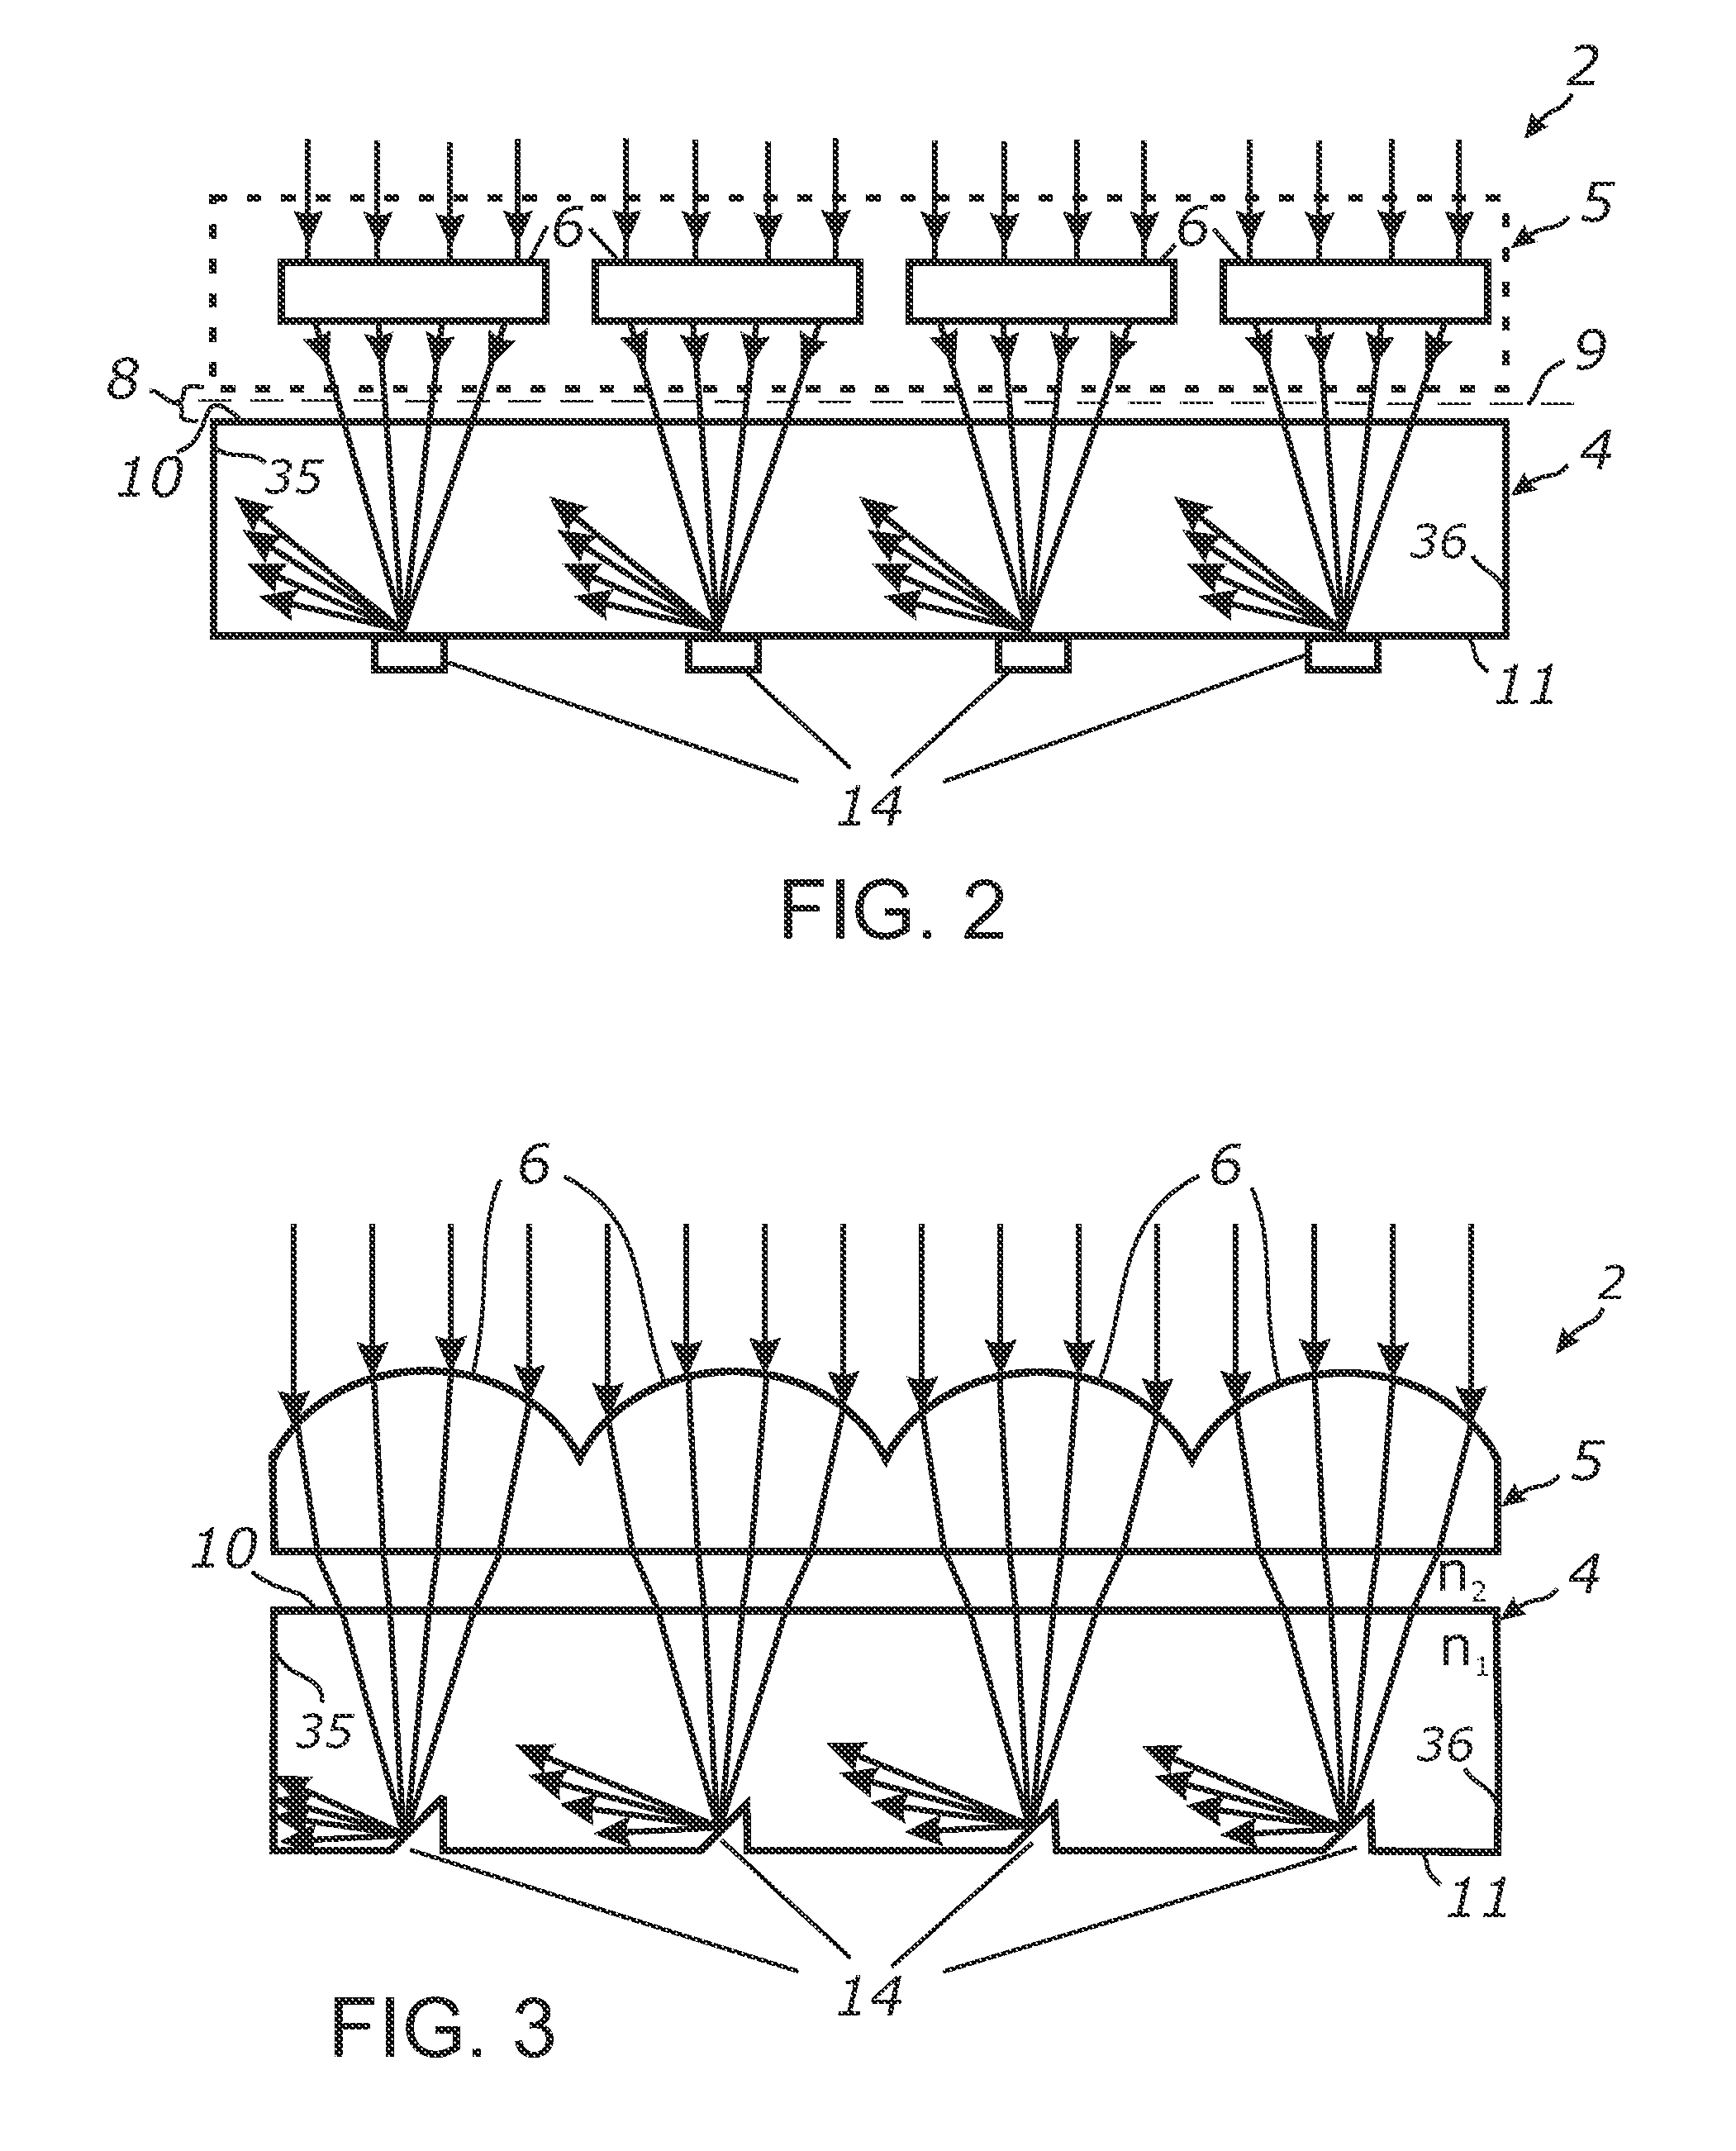 Light collection and illumination systems employing planar waveguide